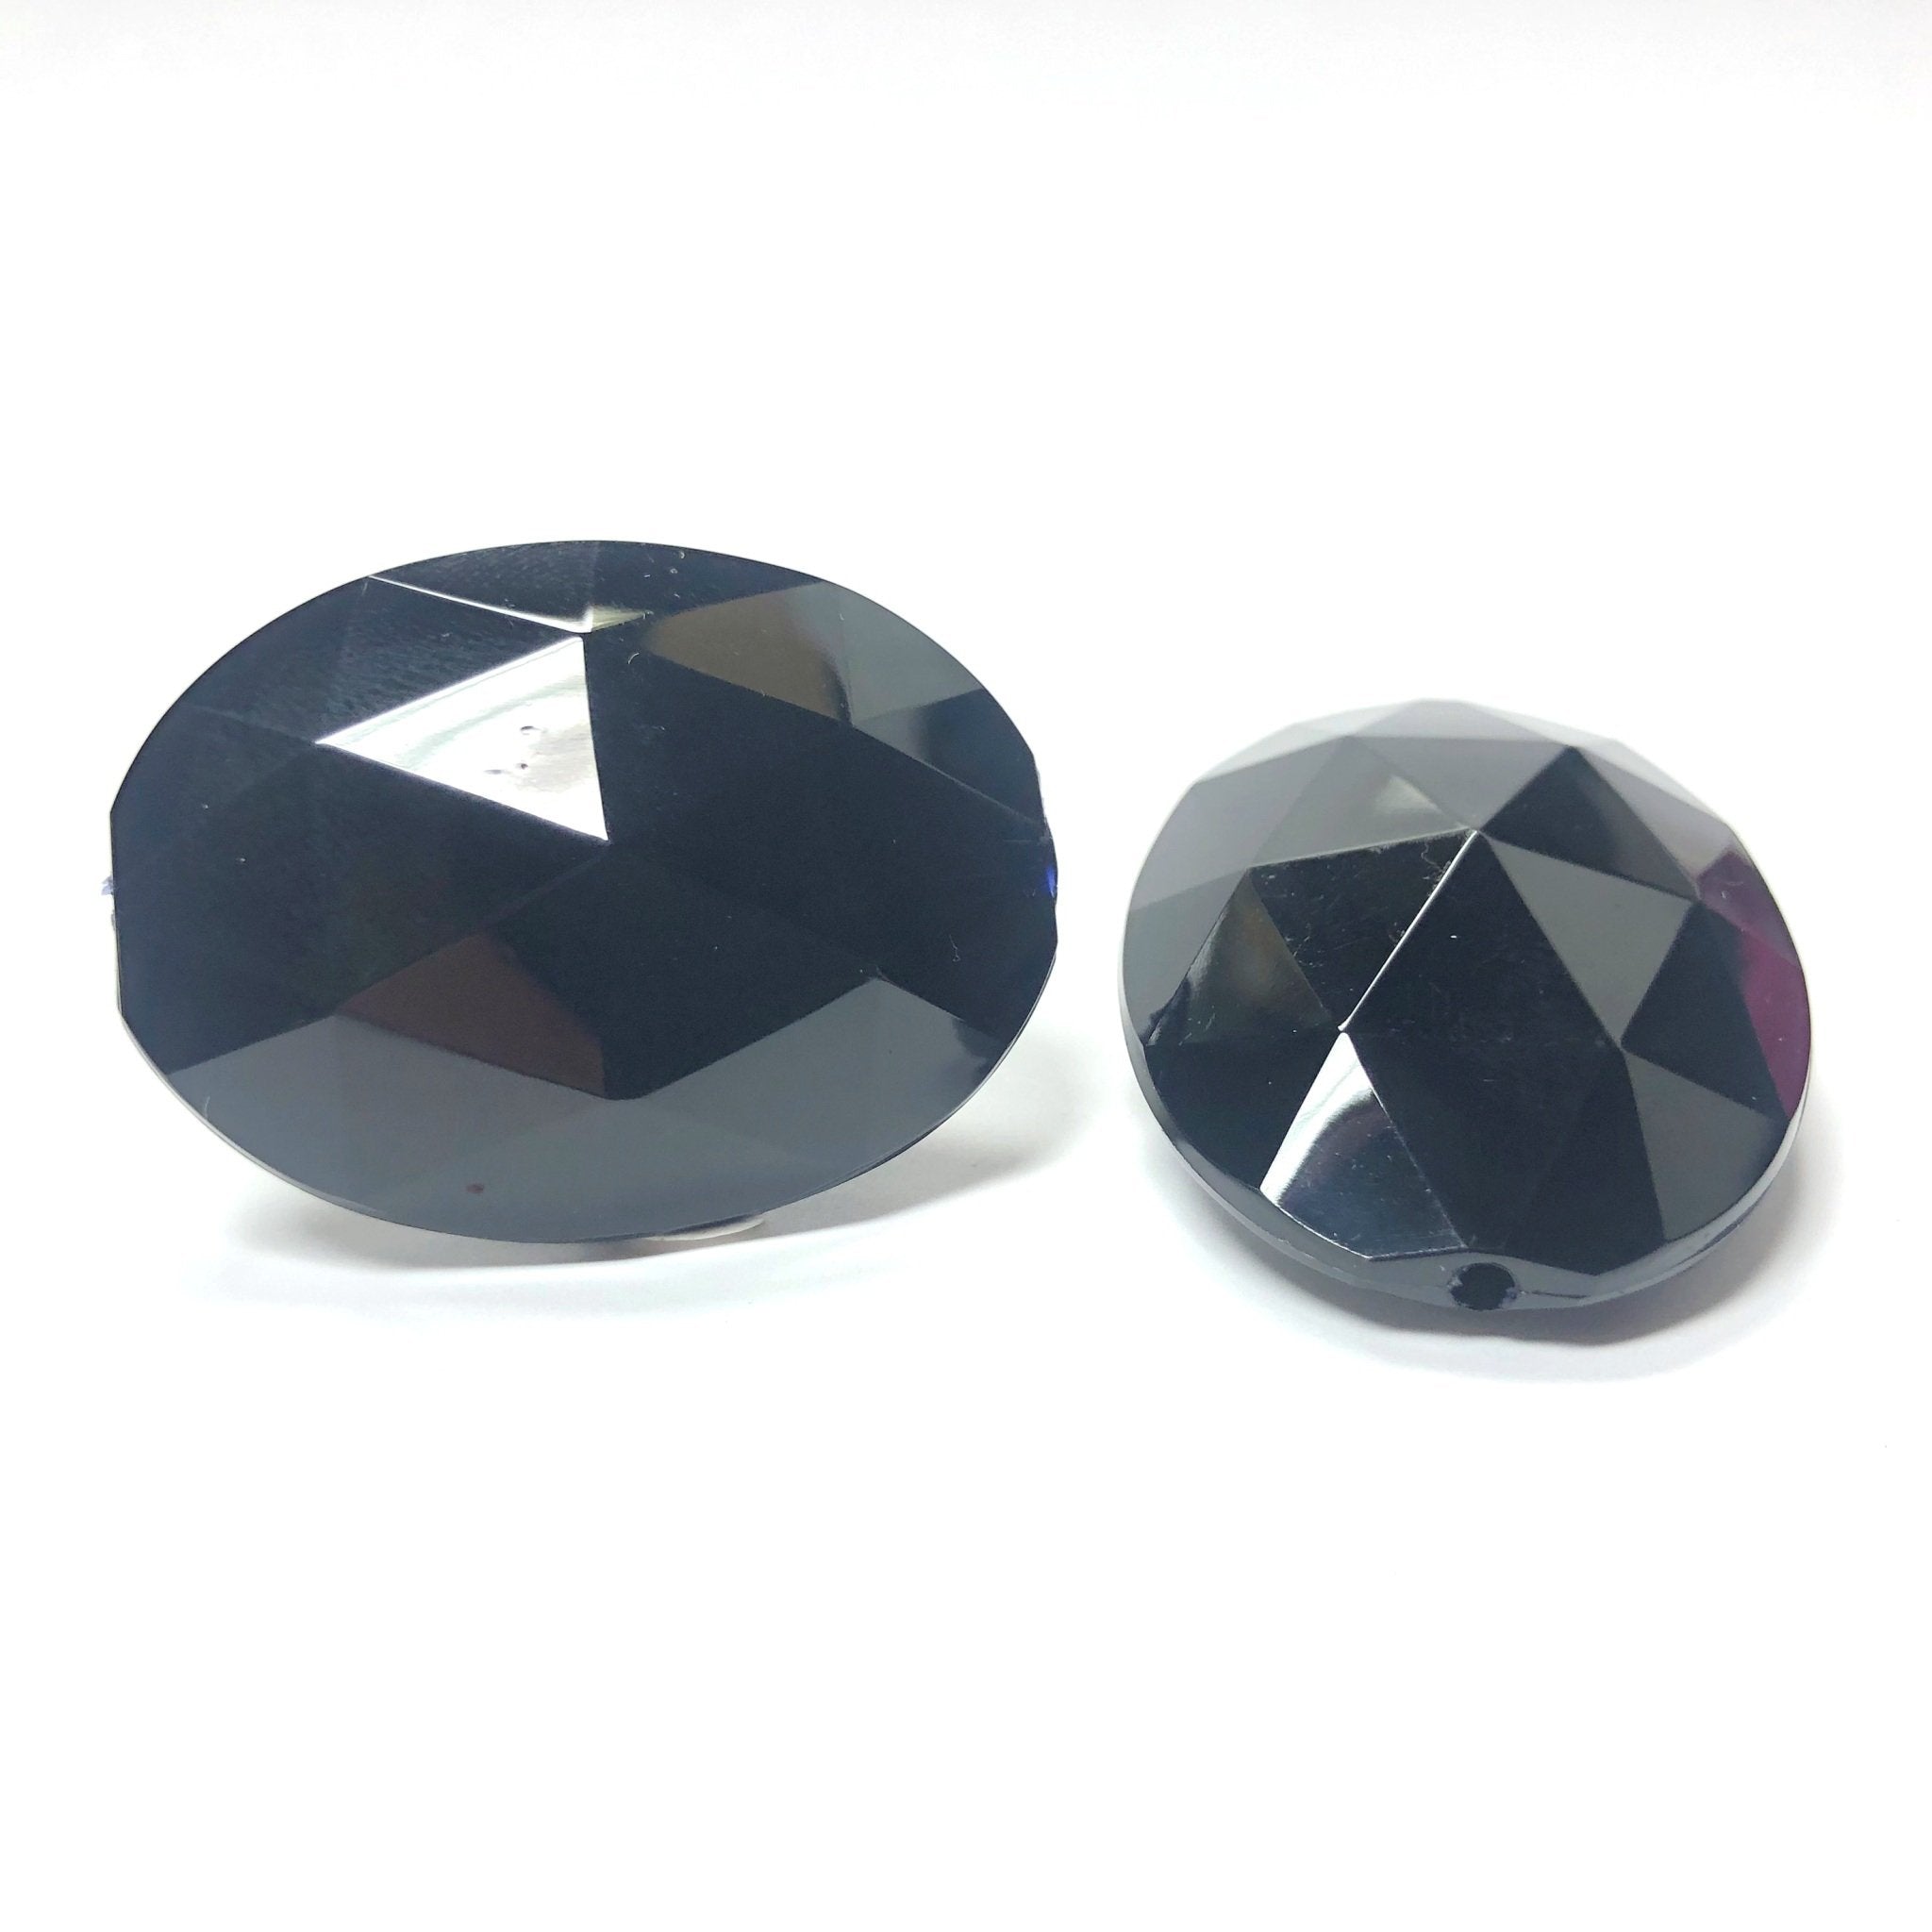 38X29MM Black Faceted Oval Acrylic Bead (6 pieces)